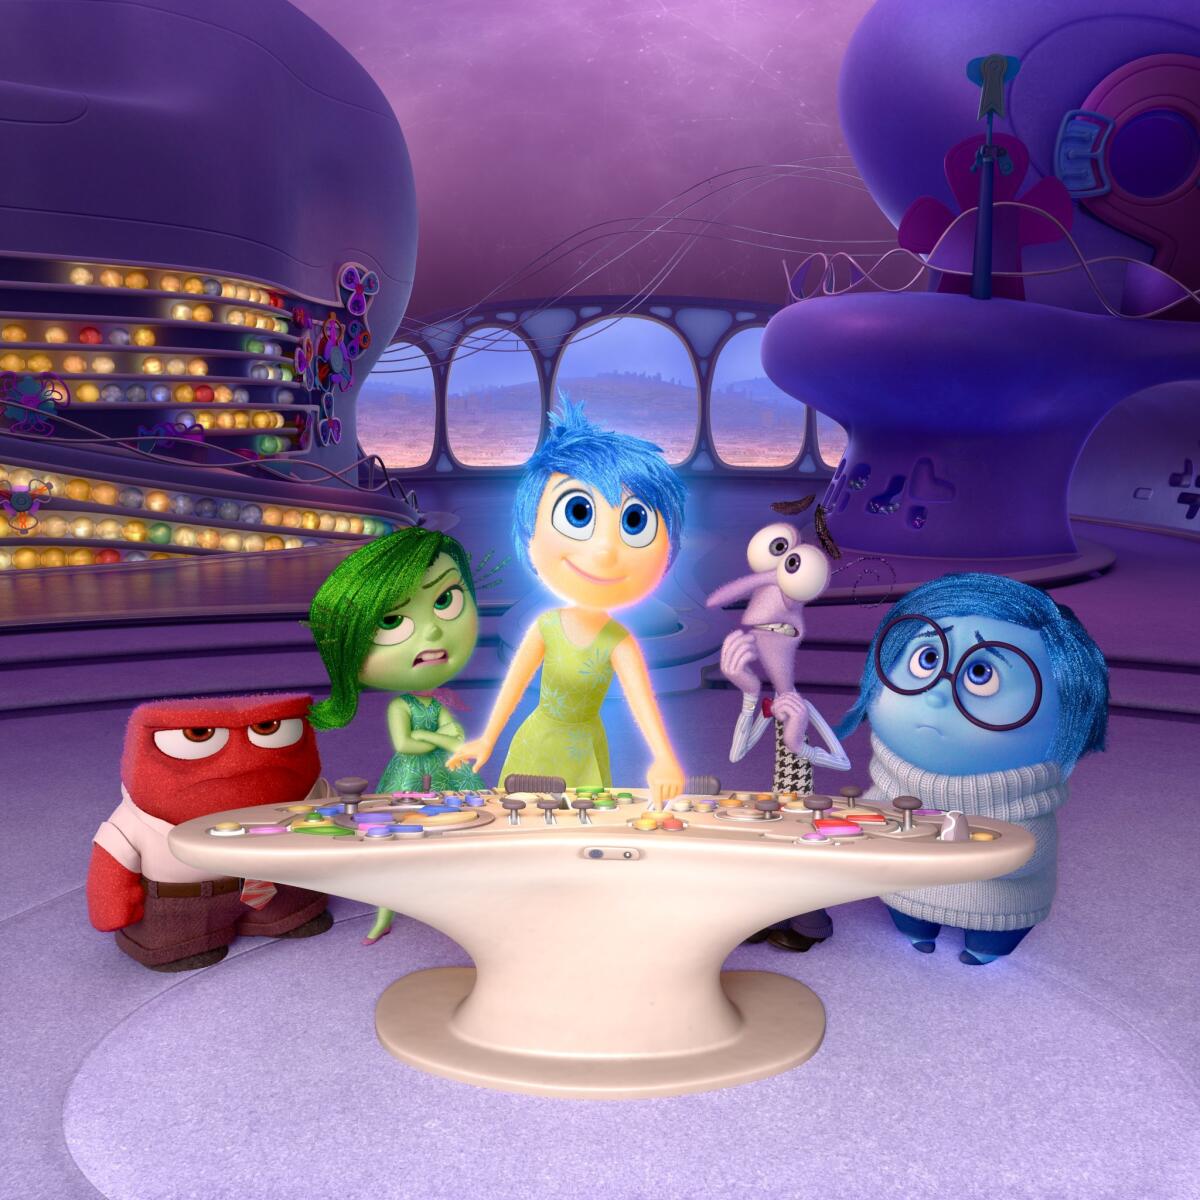 Disney-Pixar characters, from left, Anger, voiced by Lewis Black; Disgust, voiced by Mindy Kaling; Joy, voiced by Amy Poehler; Fear, voiced by Bill Hader; and Sadness, voiced by Phyllis Smith appear in a scene from "Inside Out."